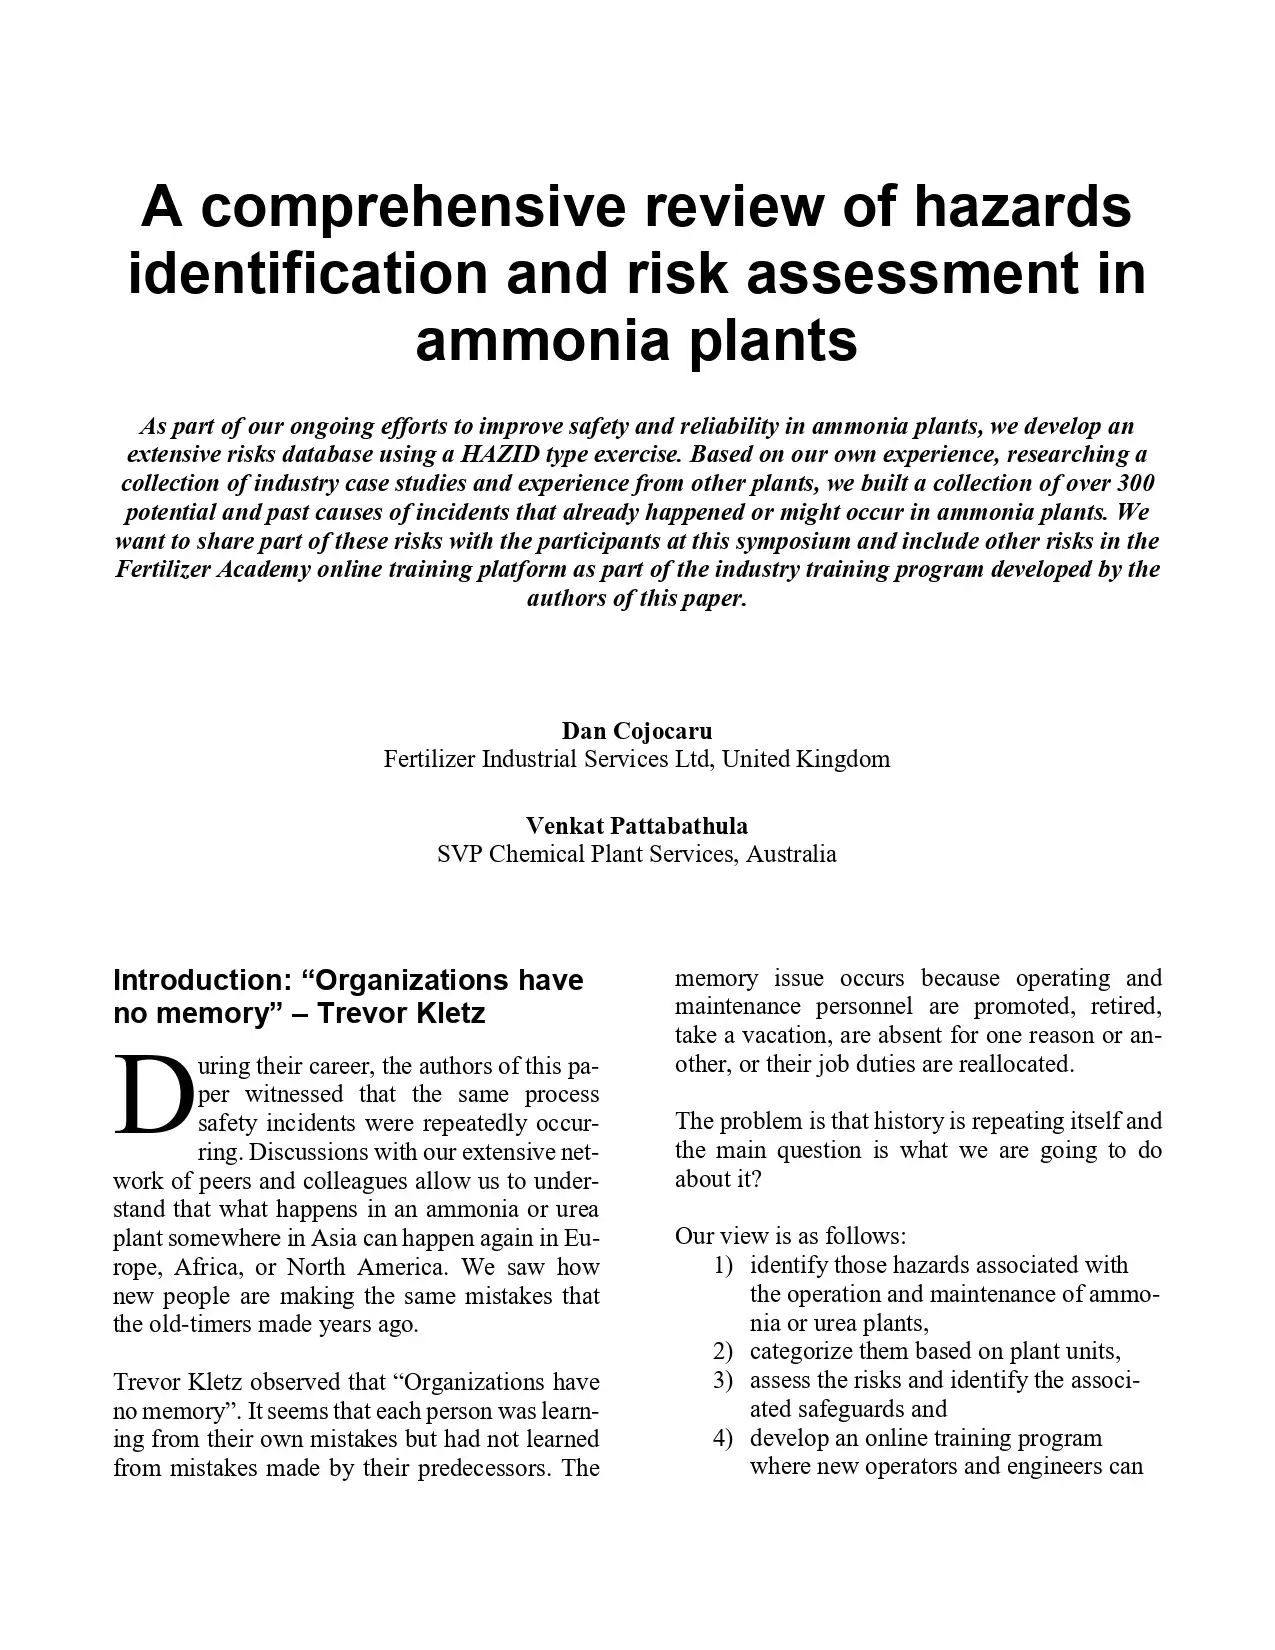 A Comprehensive Review of Hazards Identification and Risk Assessment in Ammonia Plants